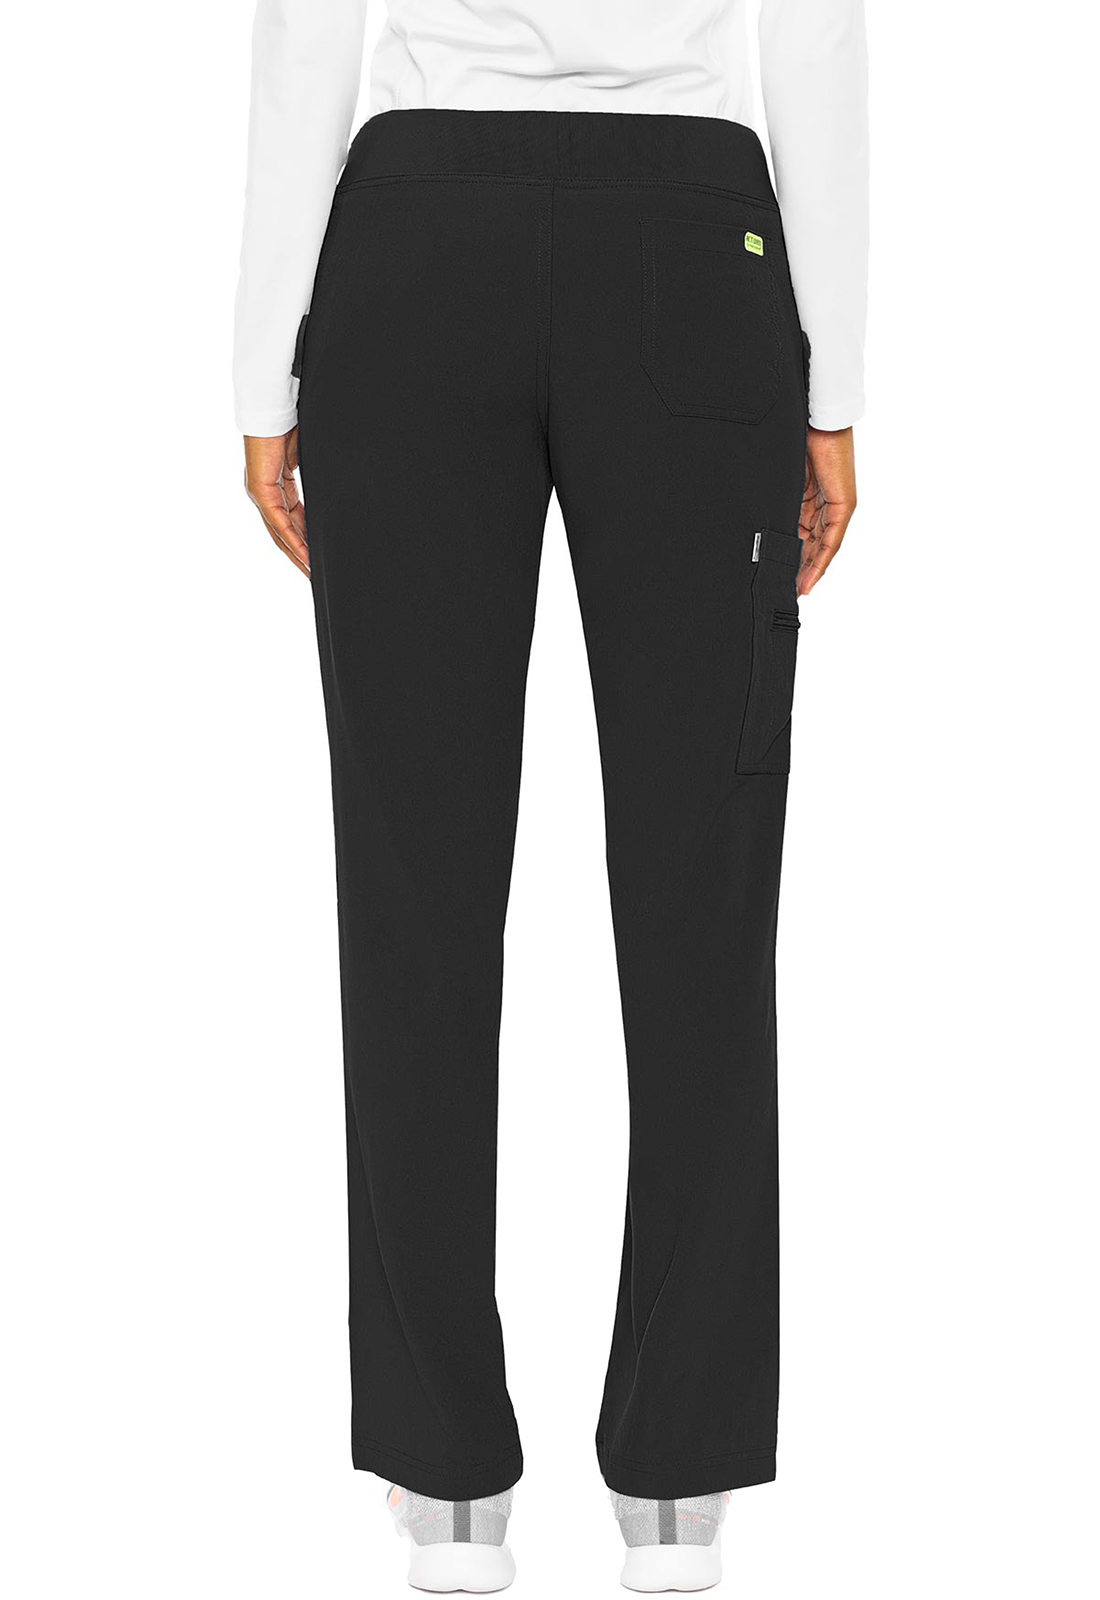 Activate Yoga 1 Cargo Pocket Pant